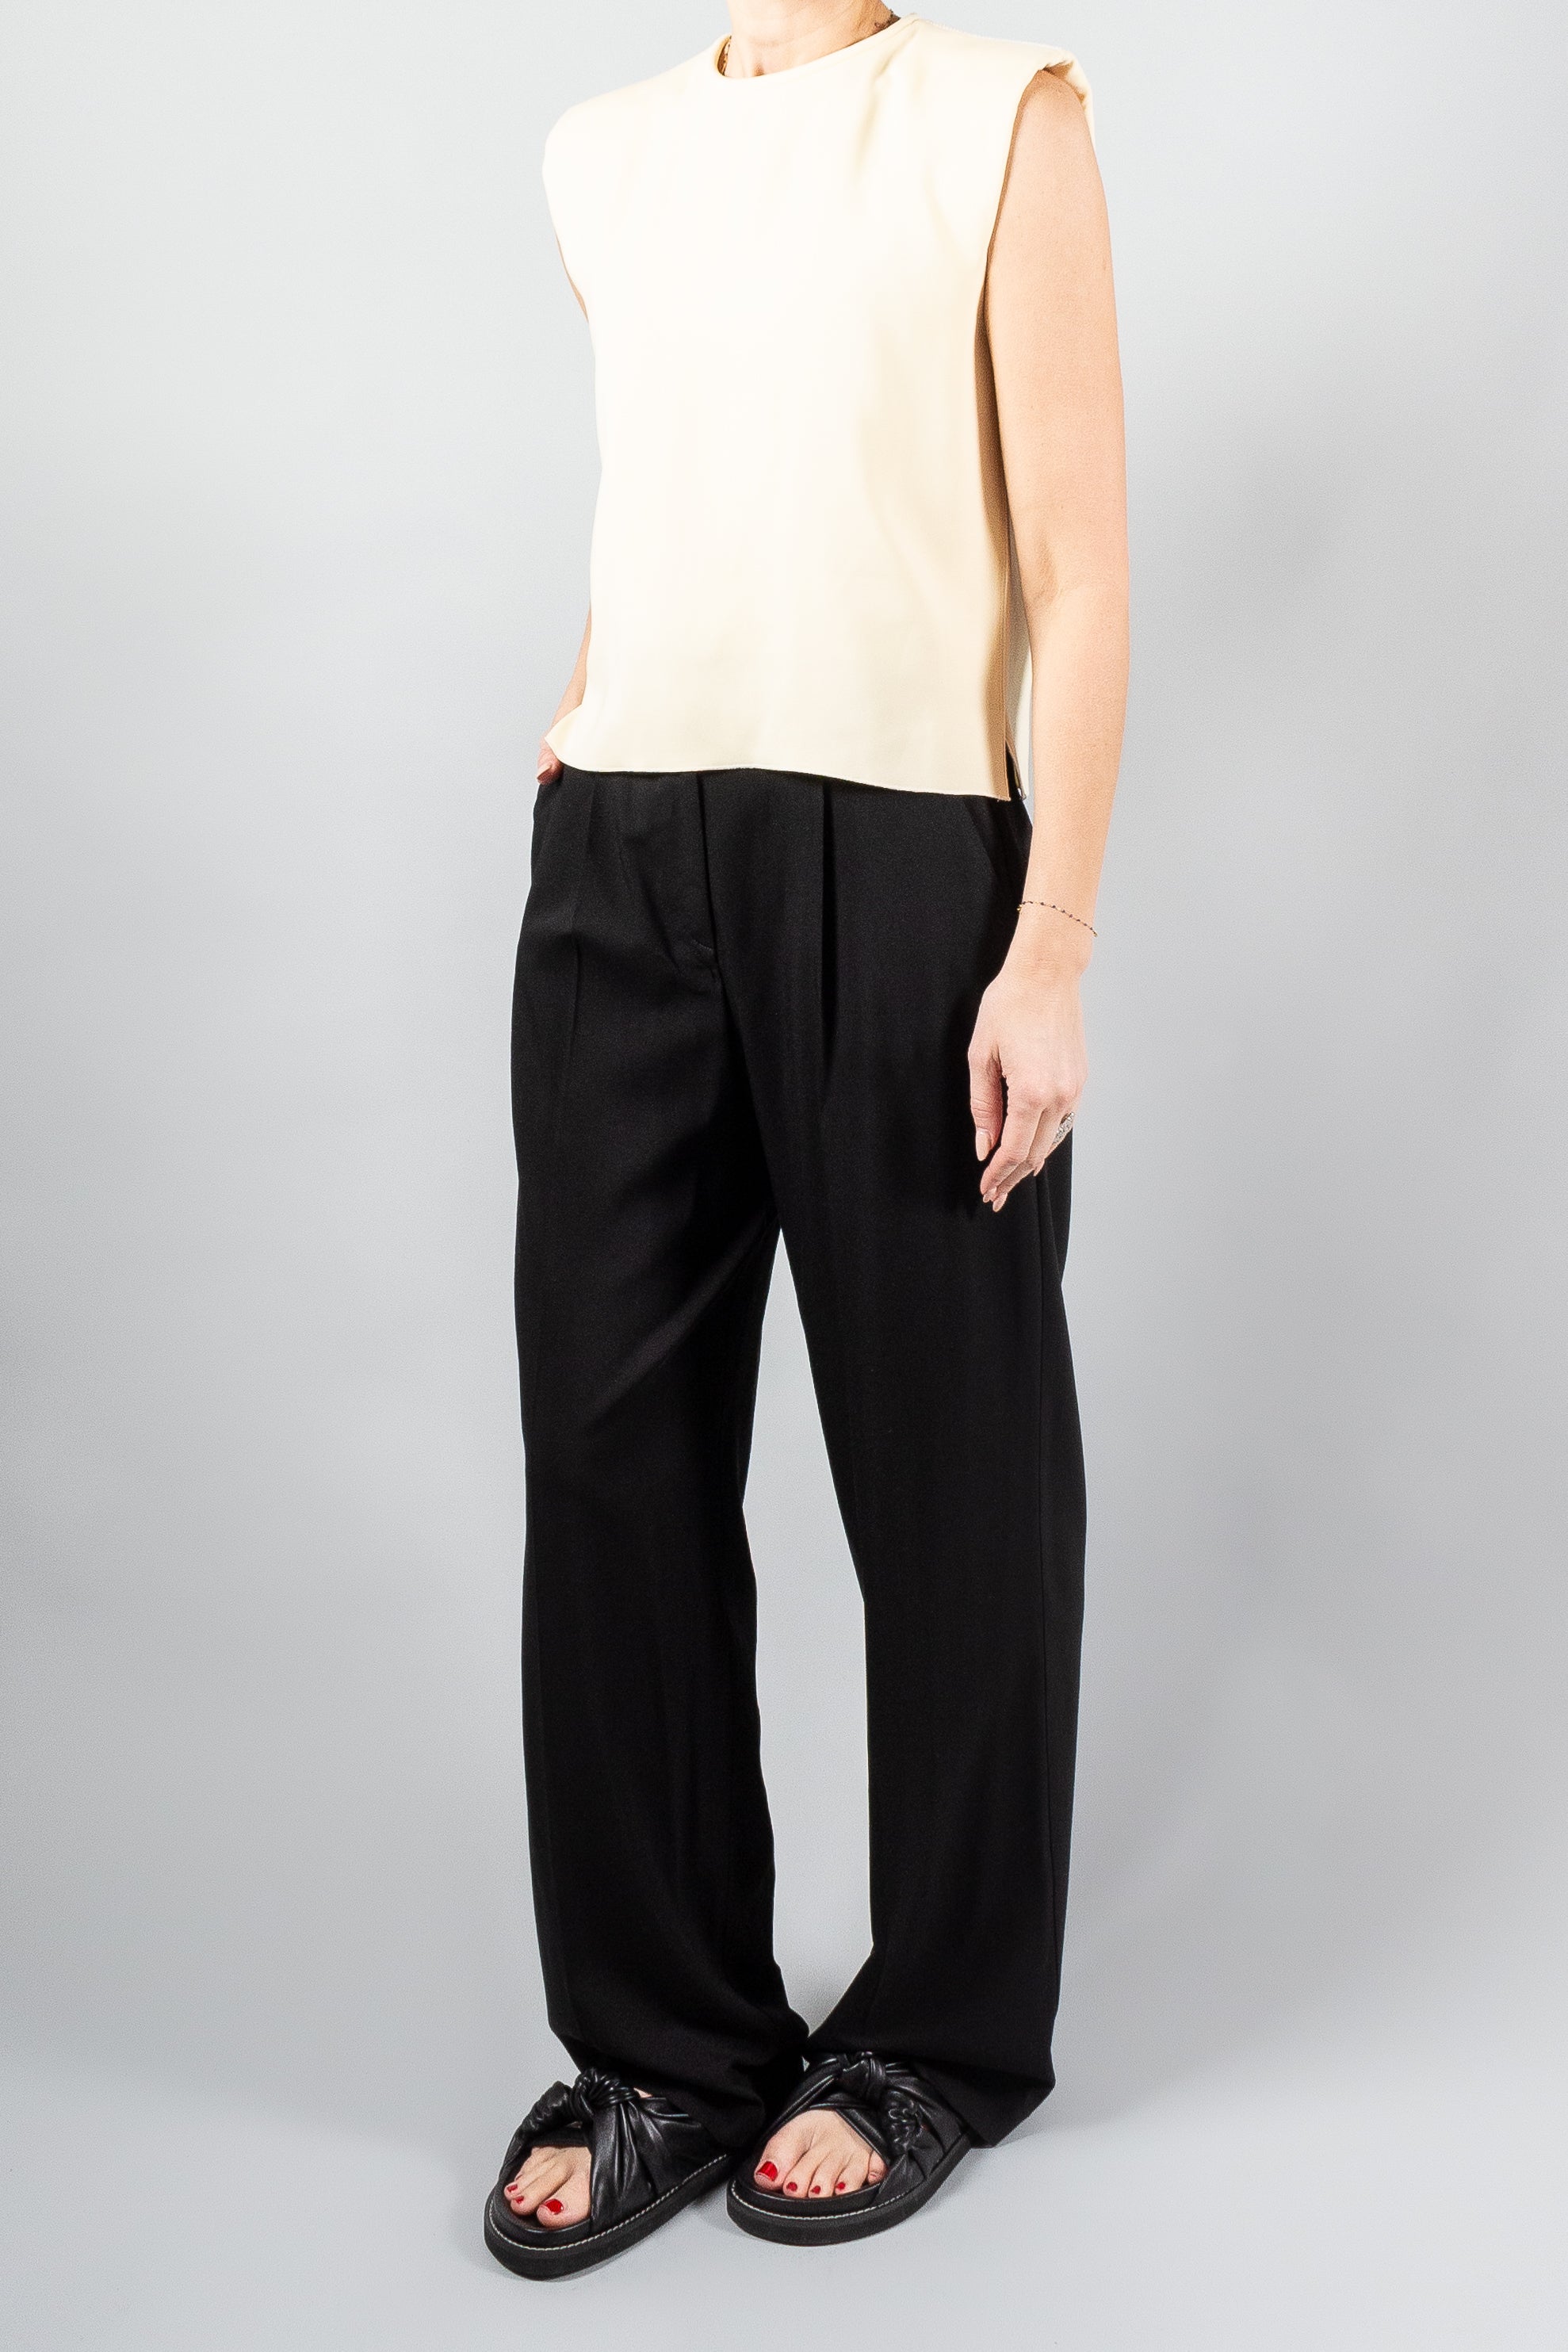 Forte Forte Stretch Crepe Cady Boxy Top-Tops-Misch-Boutique-Vancouver-Canada-misch.ca